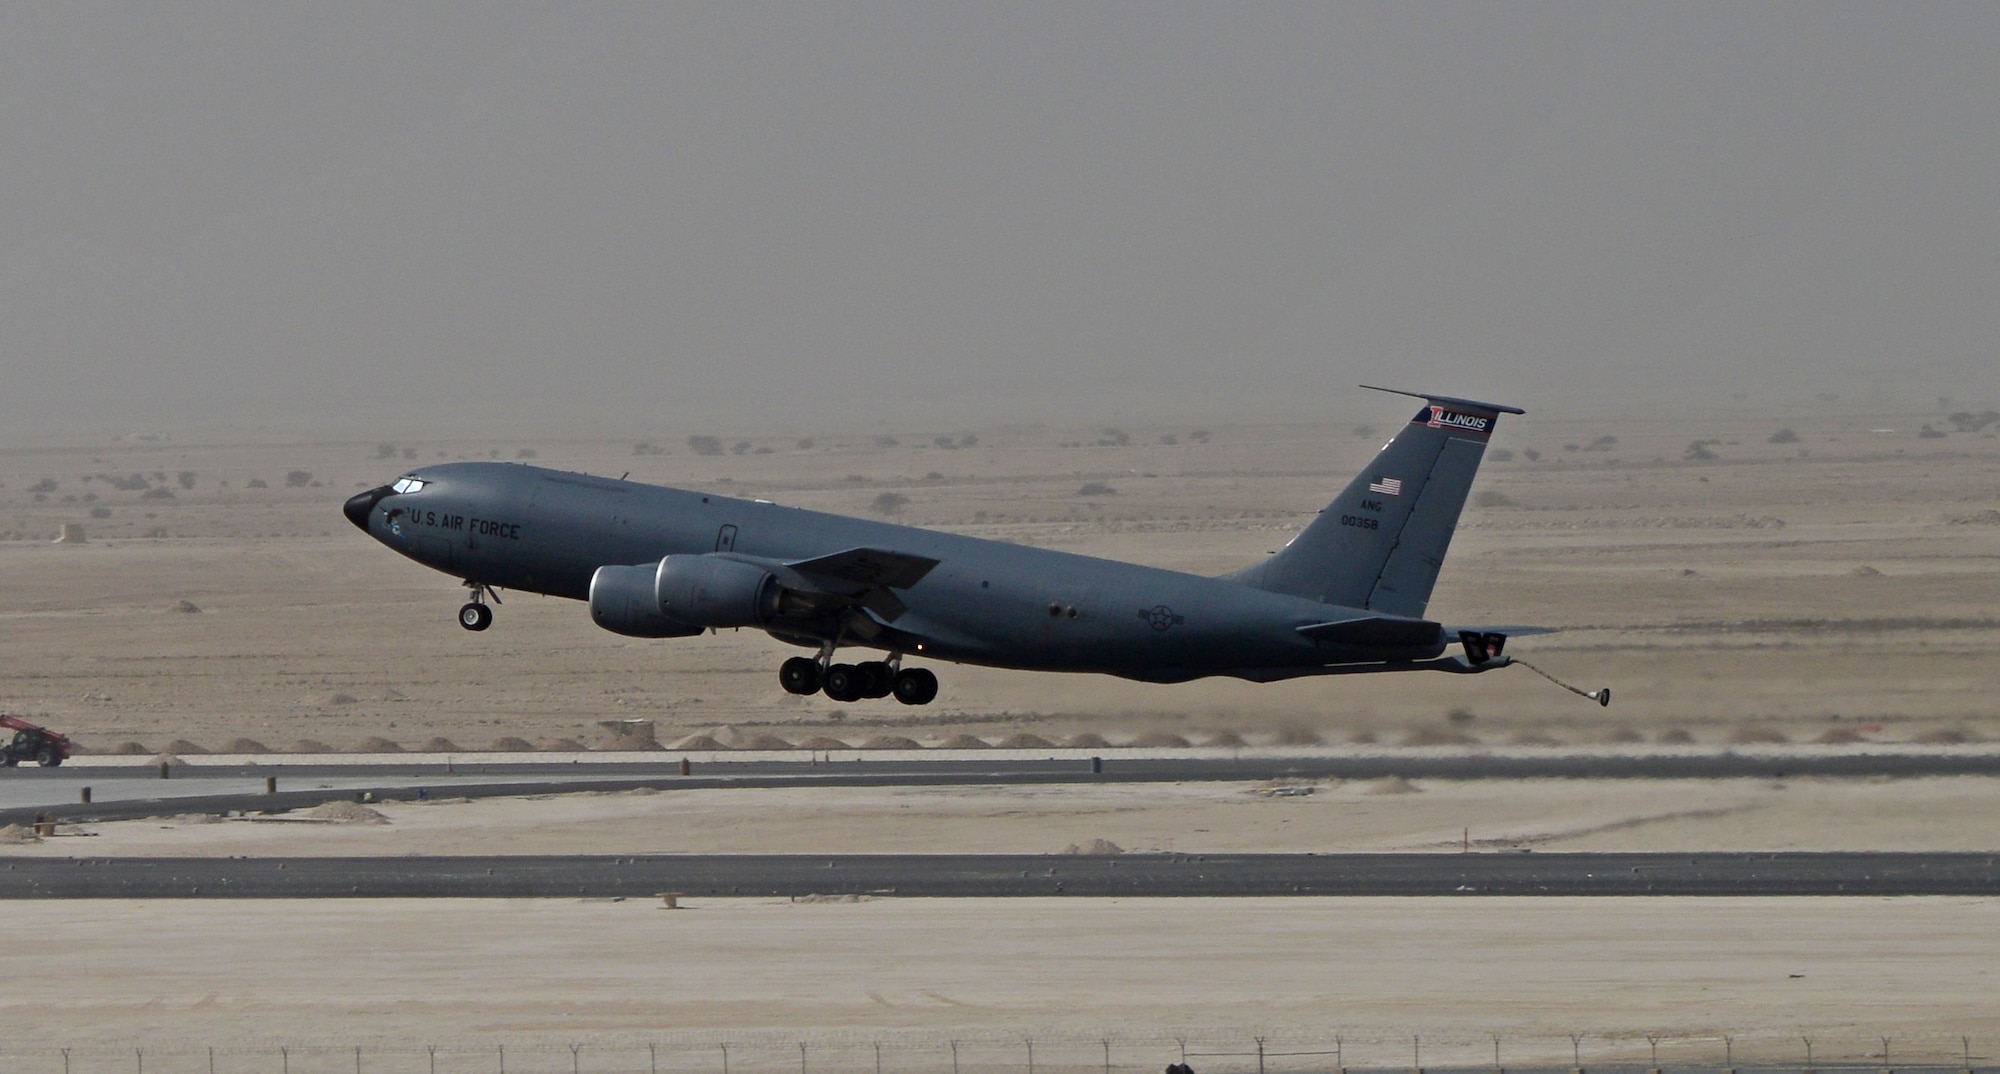 A KC-135 Stratotanker takes off from the flightline at Al Udeid Air Base, Qatar, Feb. 18, 2015. The KC-135 fleet at Al Udeid AB flew more than 14,700 sorties in 2015 accumulating 103,419 combat hours in support of Operations Inherent Resolve and Freedom’s Sentinel. (U.S. Air Force photo/Senior Airman Kia Atkins) 